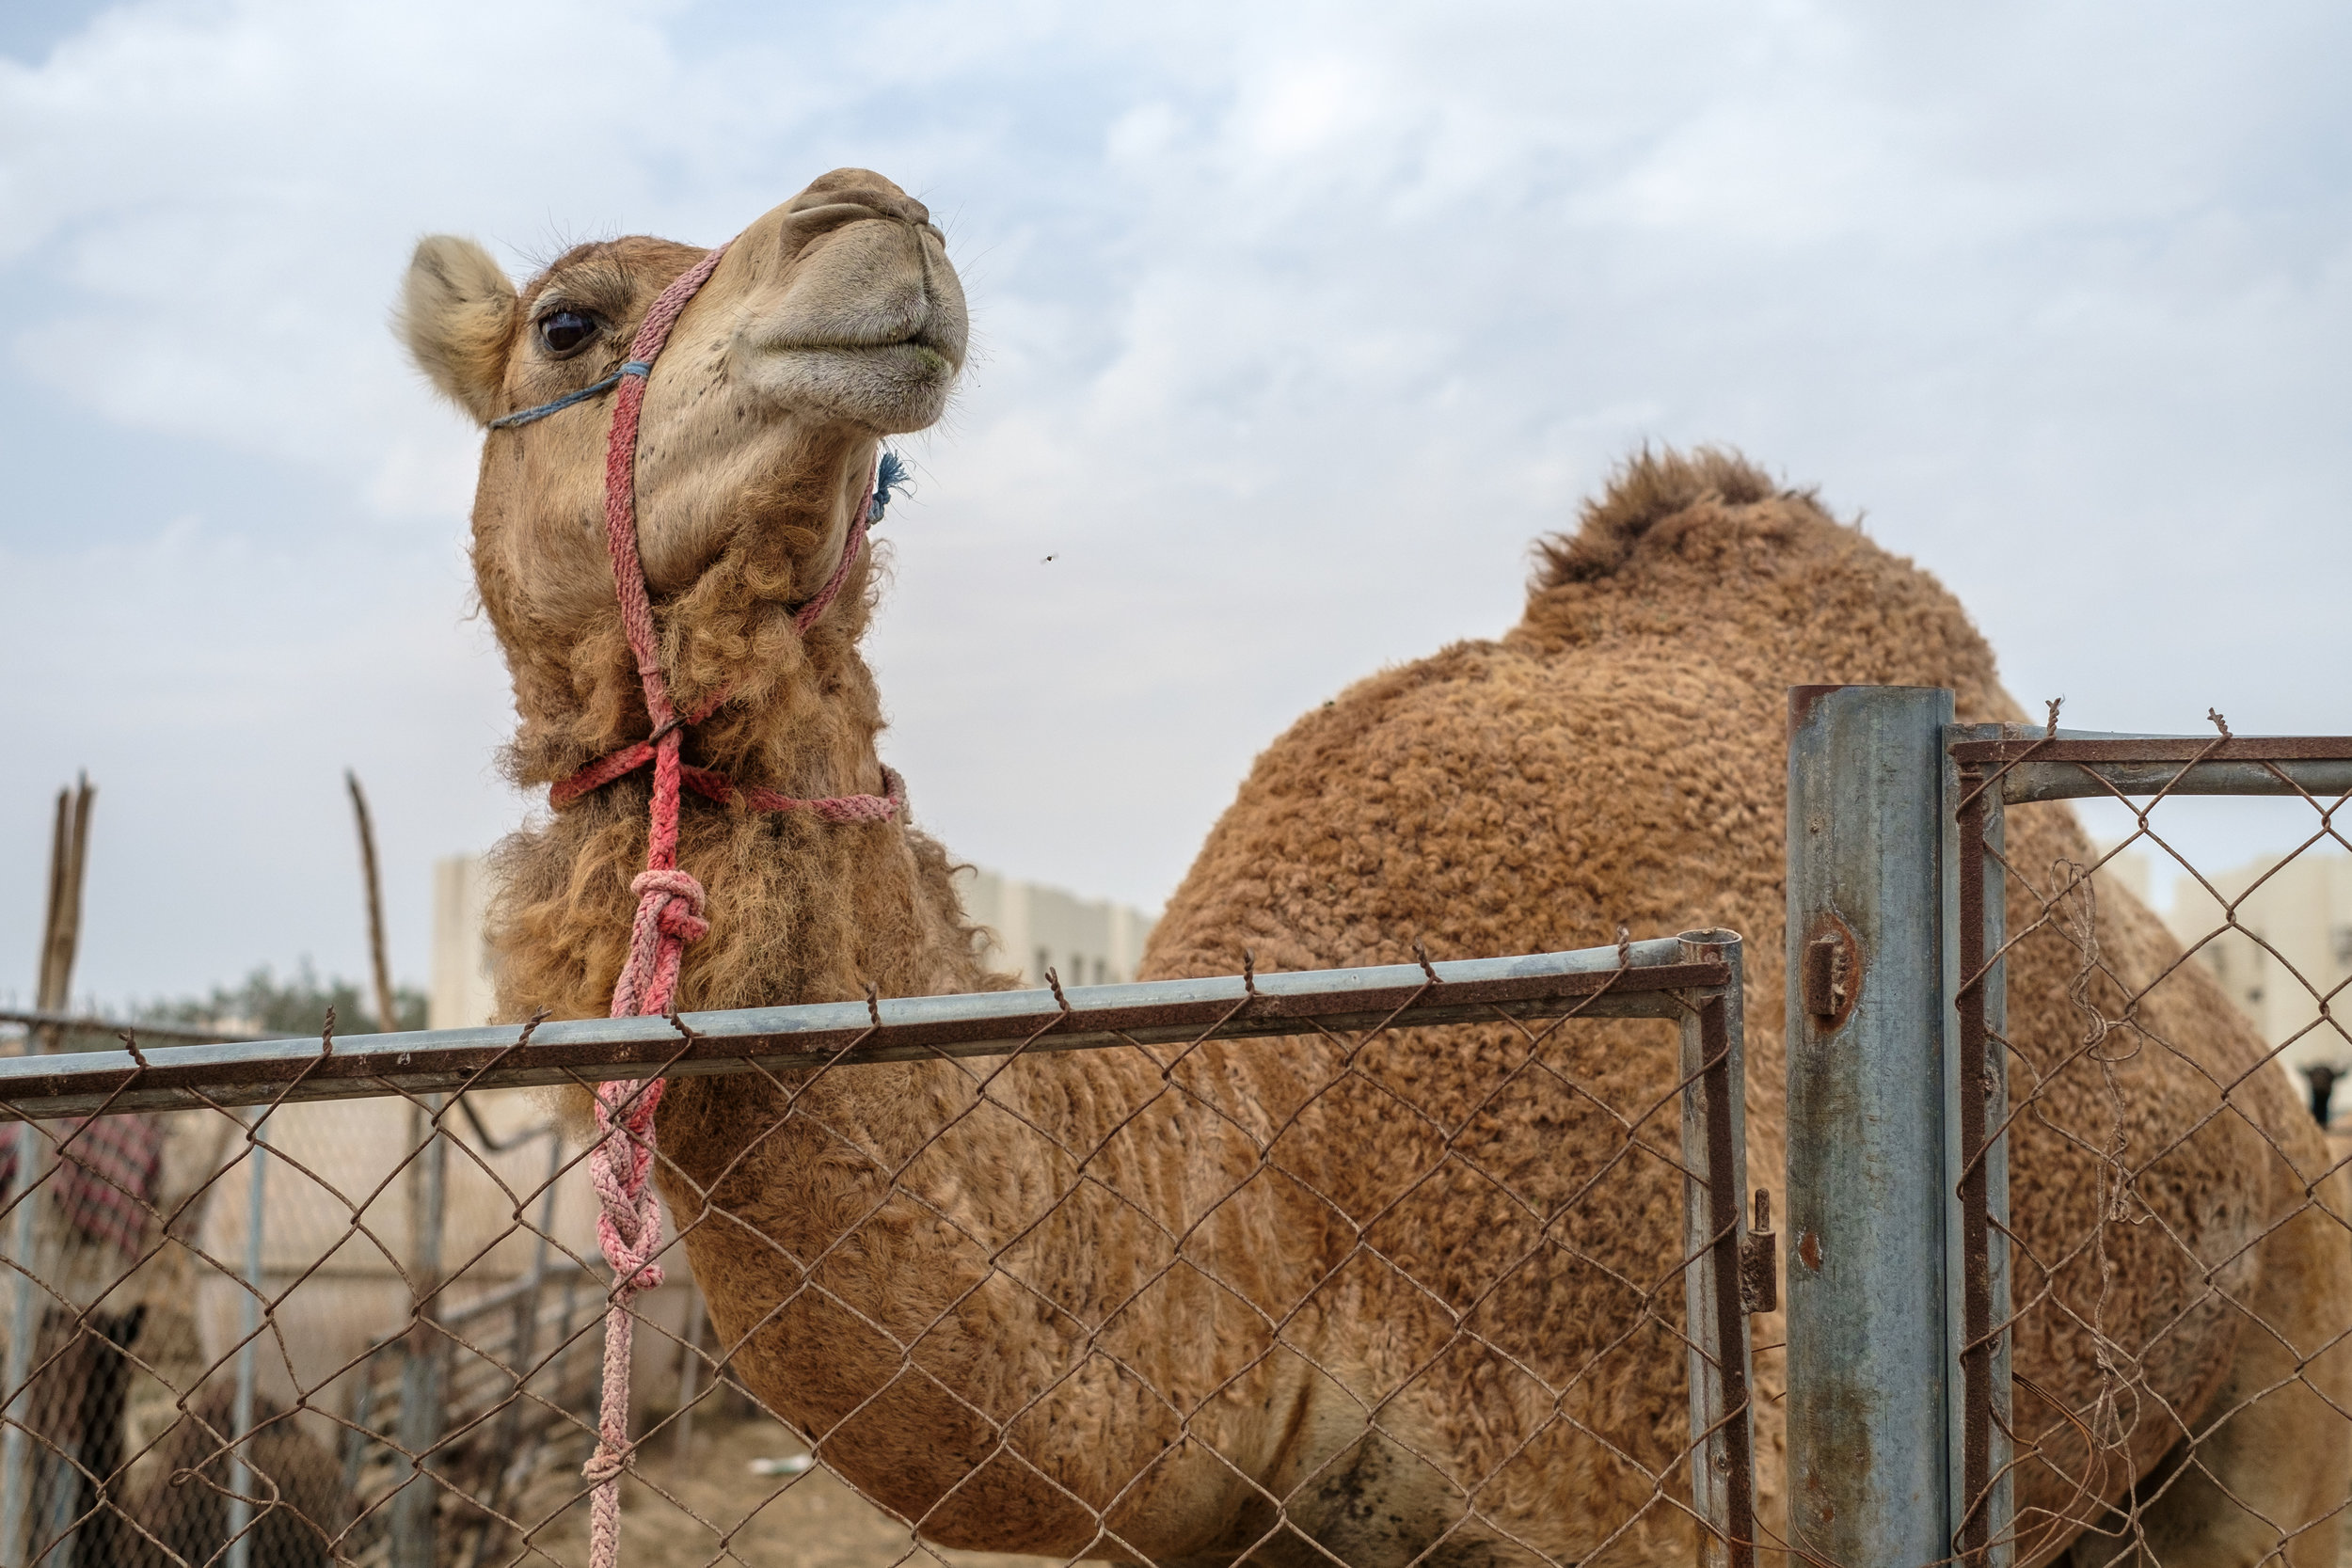  A camel waiting to be sold at the Camel Market in the Abu Hammour district on the outskirts of Doha. 